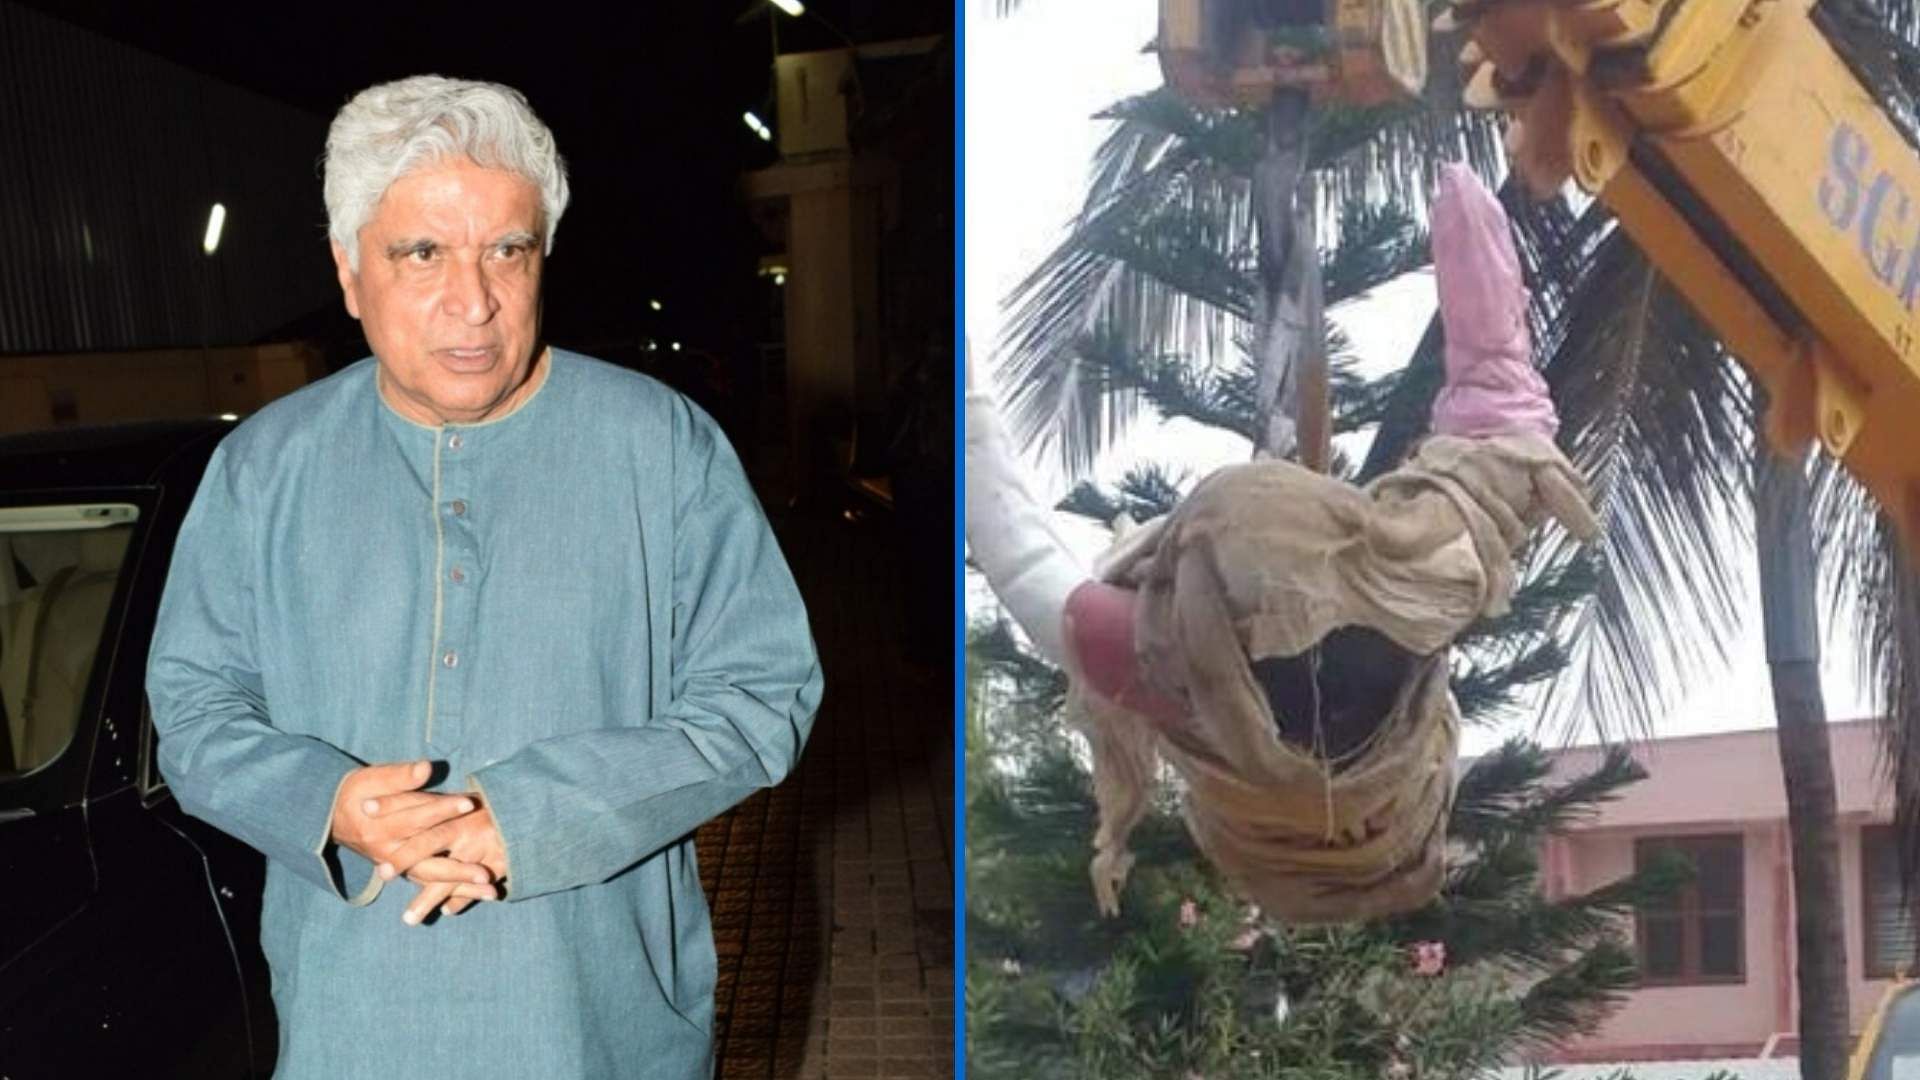 Javed Akhtar has condemned the removal of a Christ statue in Bengaluru.